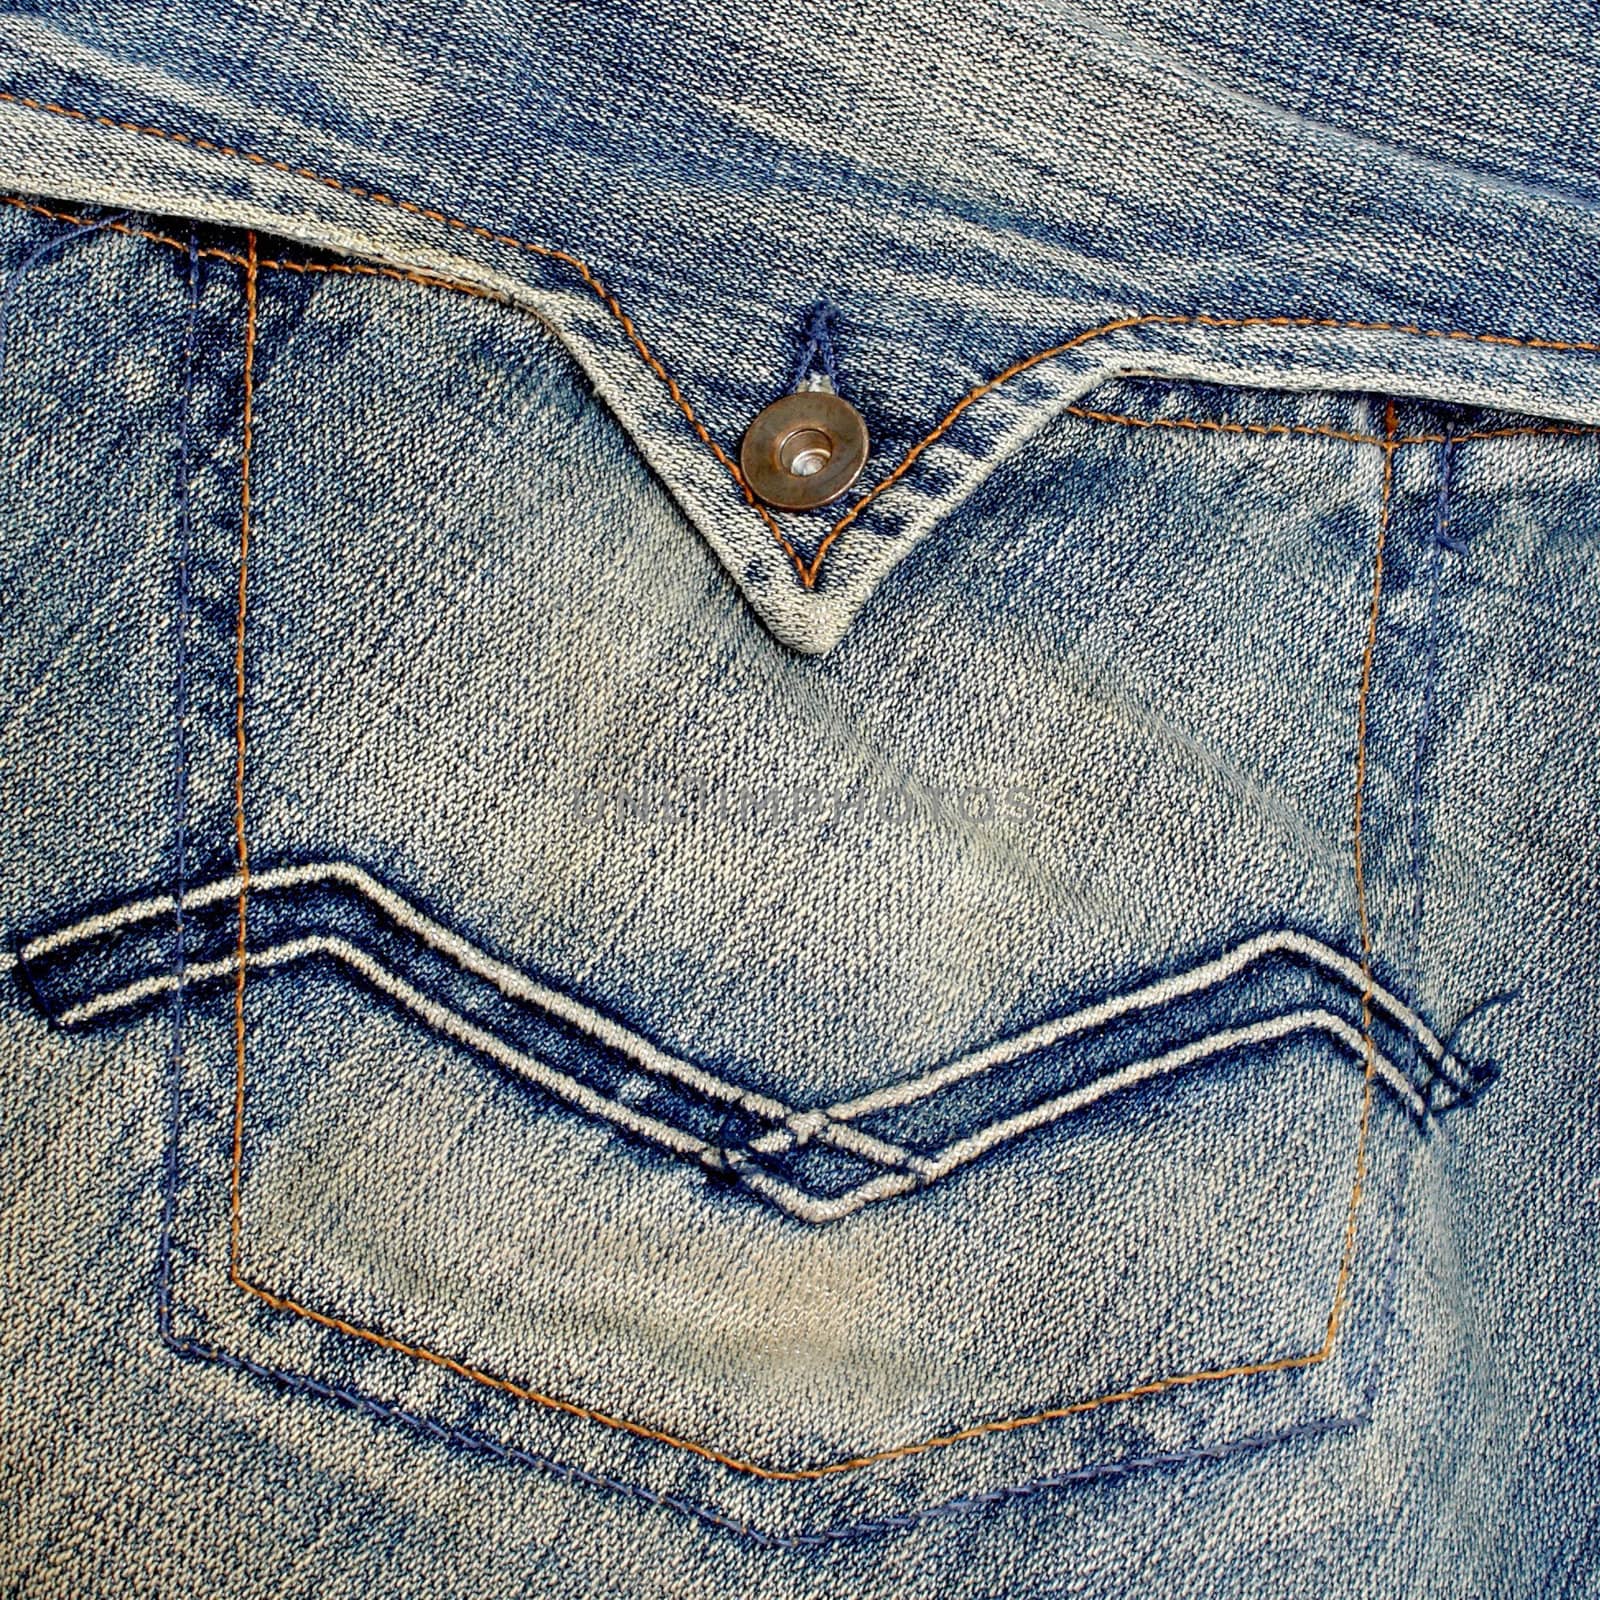 Blue jeans pocket by liewluck